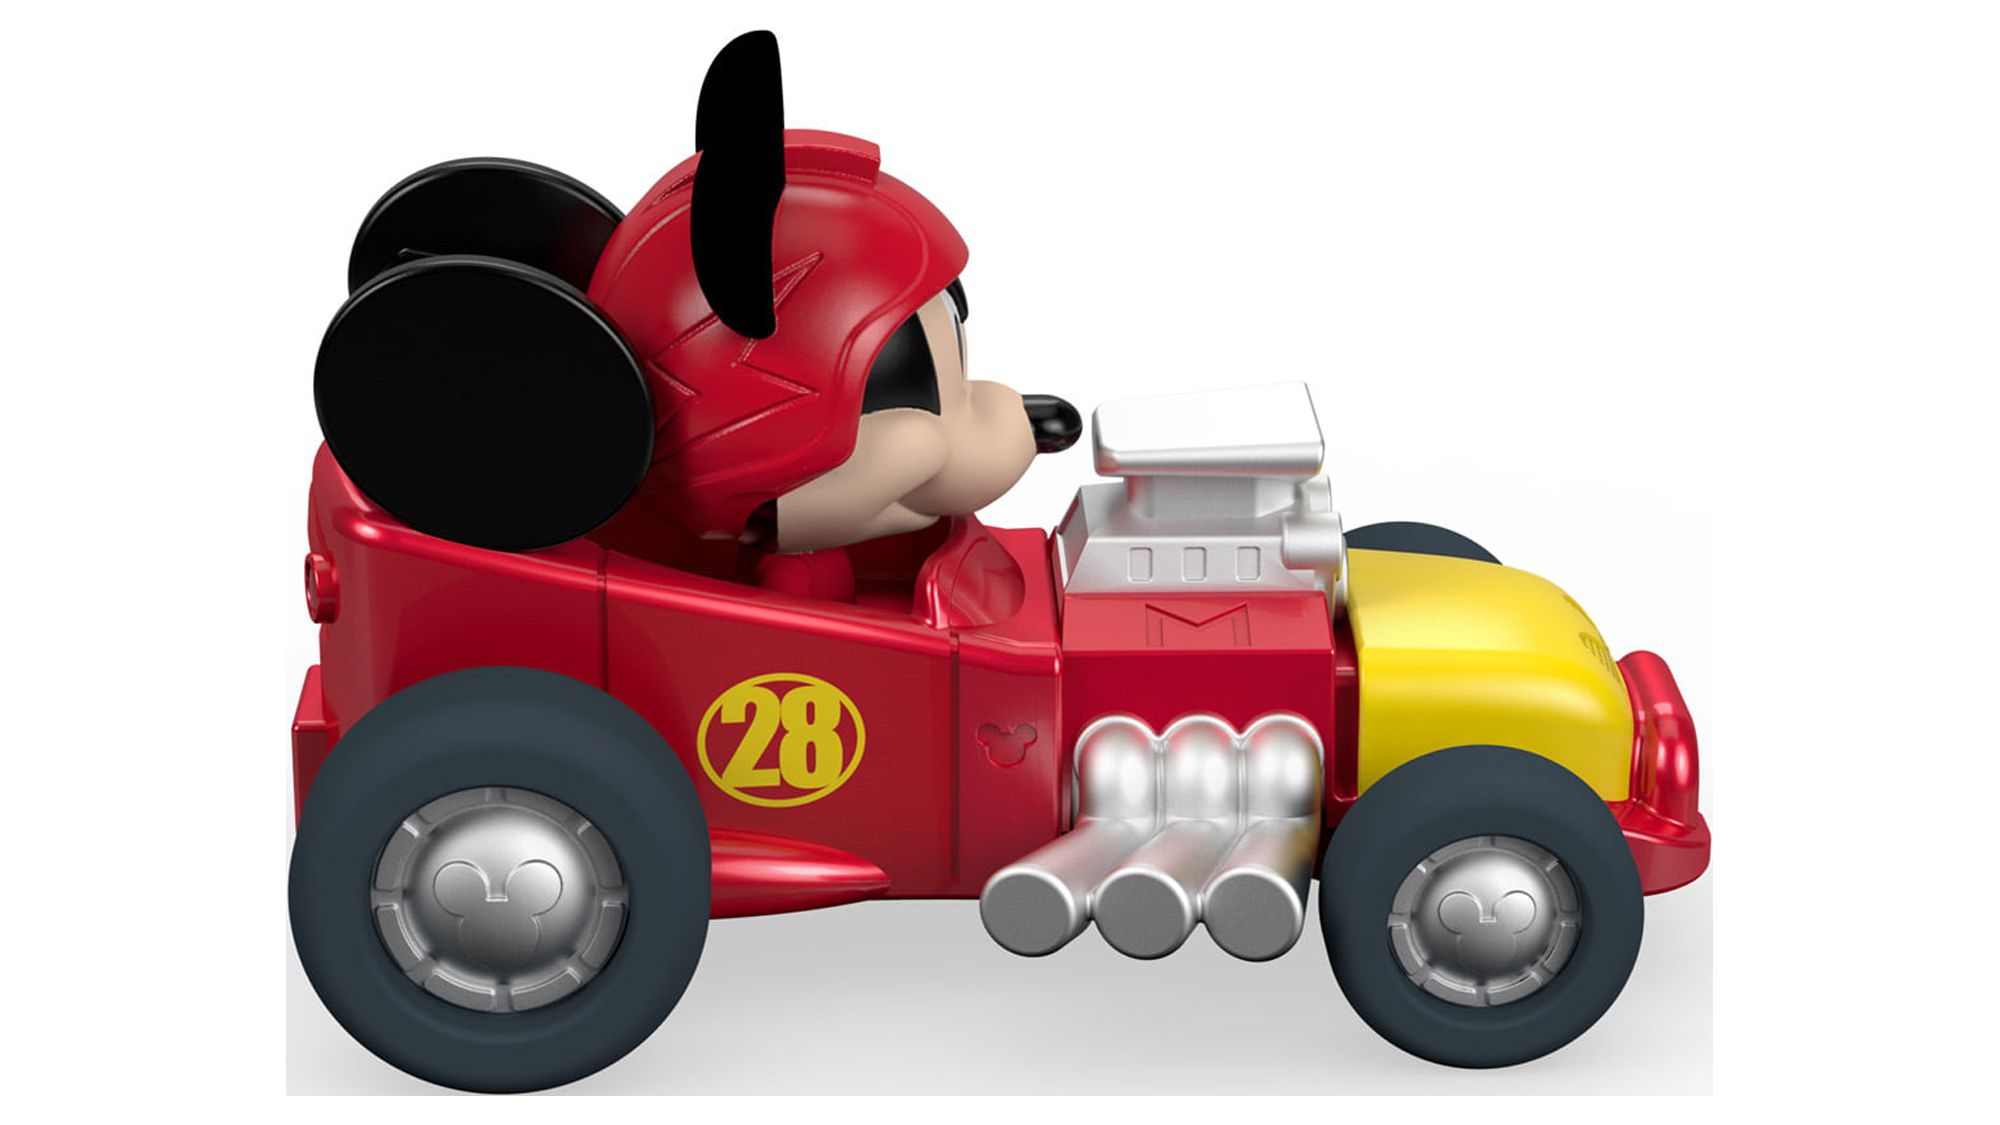 Disney Mickey and the Roadster Racers Mickey's Hot Rod - image 3 of 6